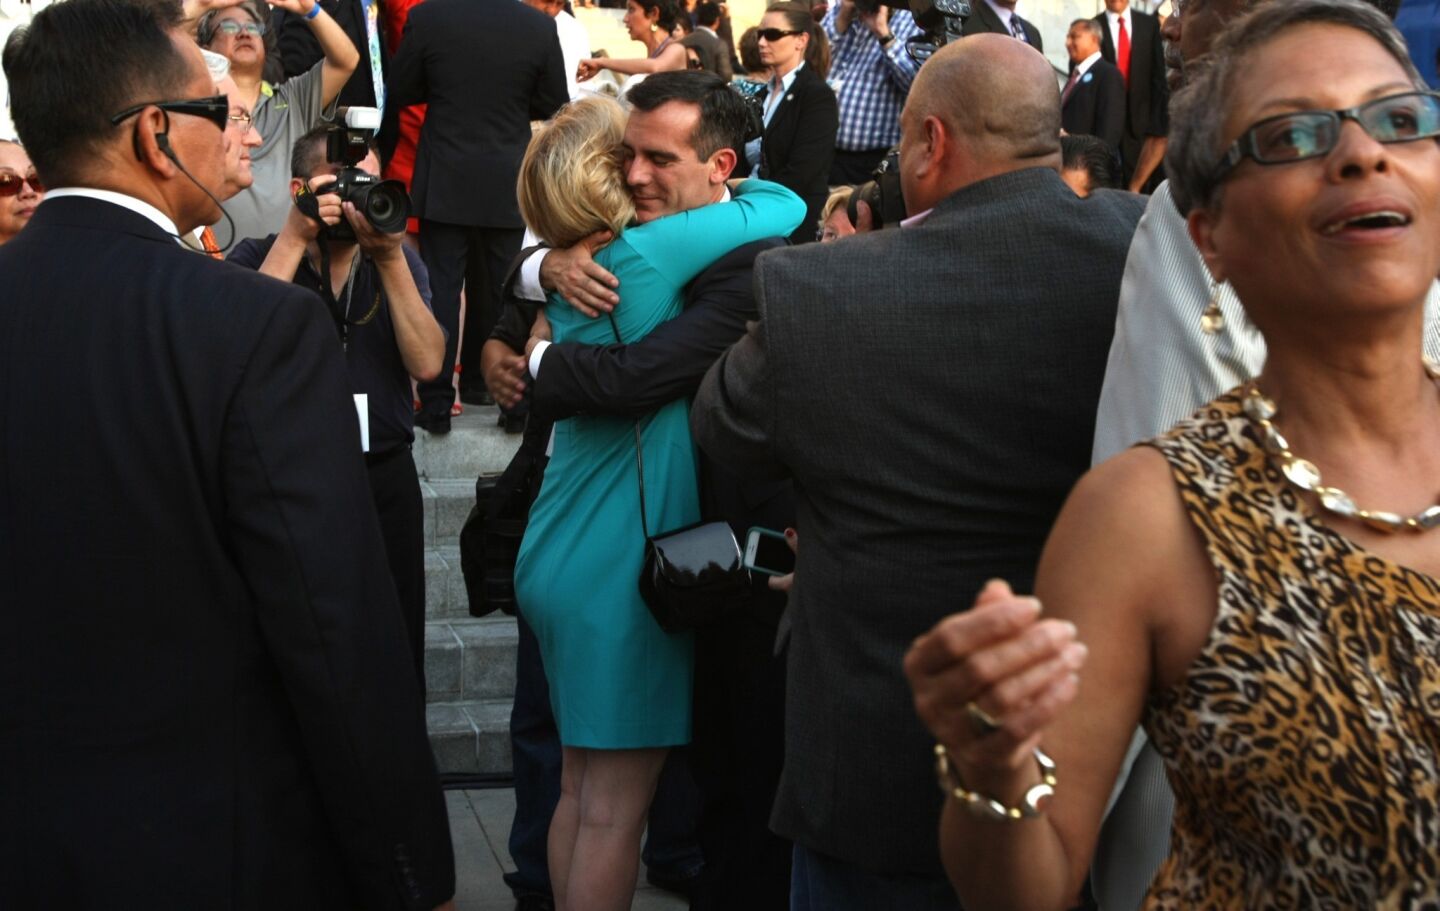 Eric Garcetti receives a hug of support from former mayoral opponent and departing City Controller Wendy Greuel, who watched the inauguration from the audience but did not speak.